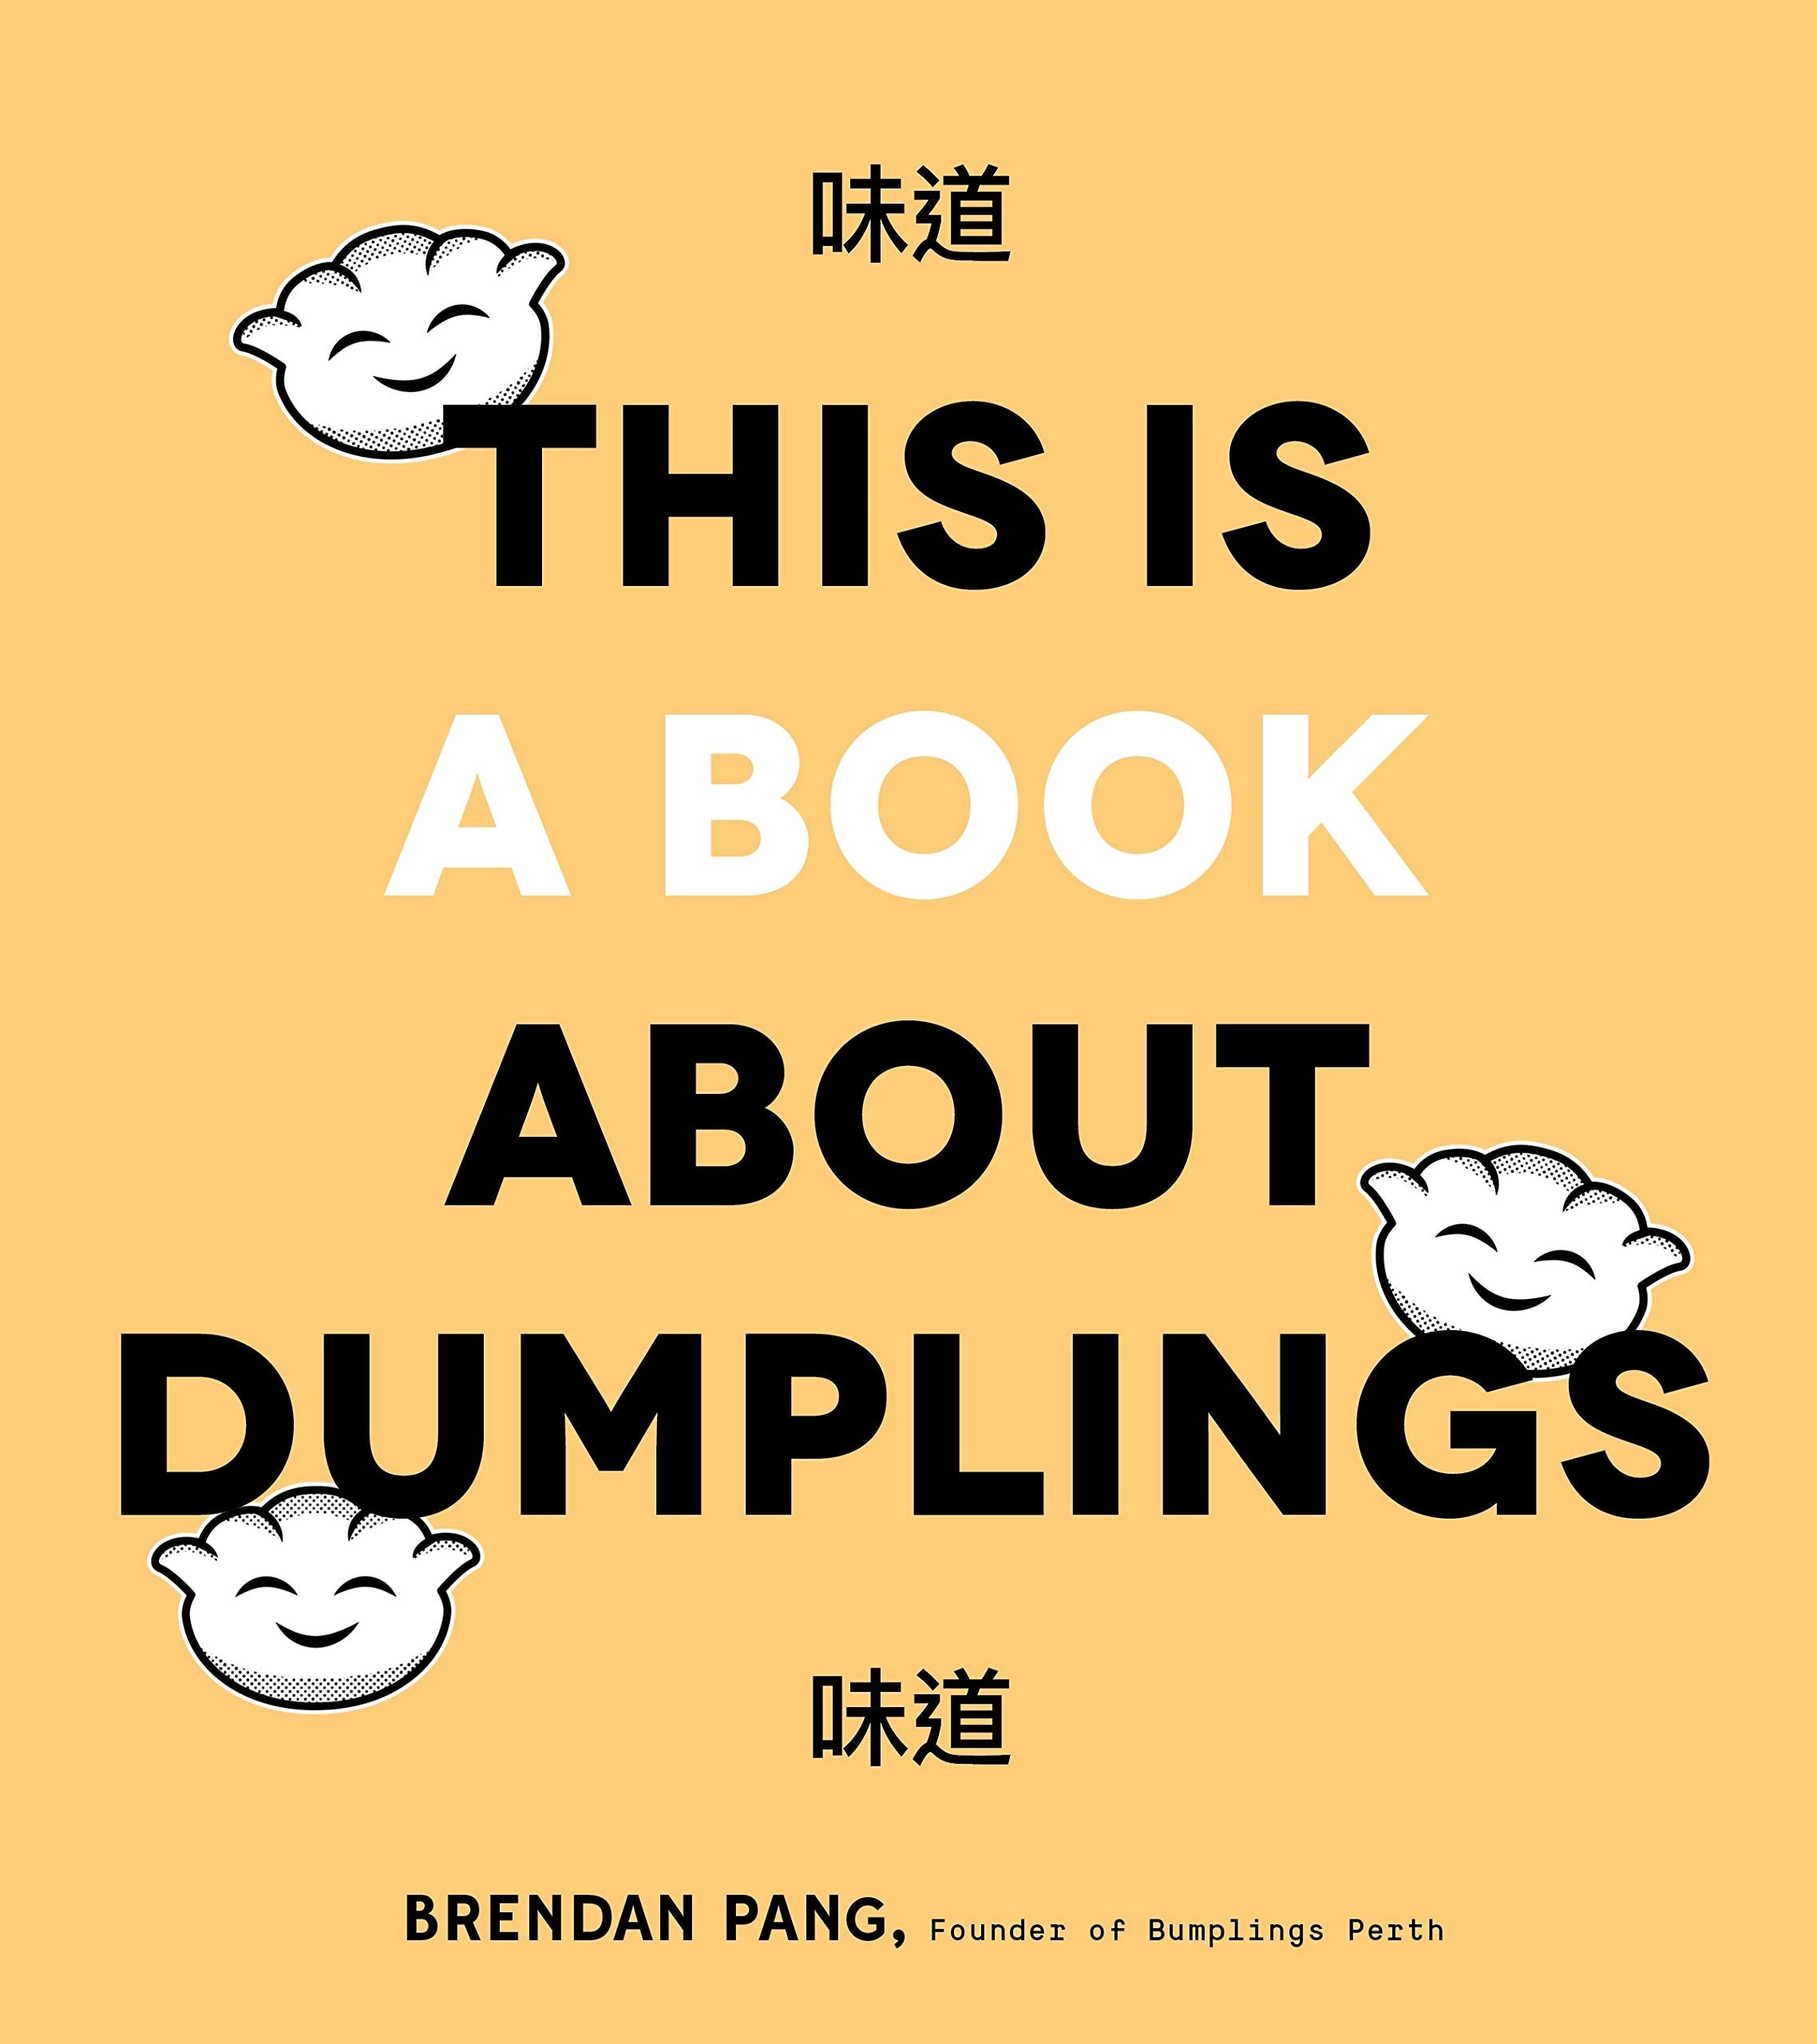 This is a Book About Dumplings (Brendan Pang)